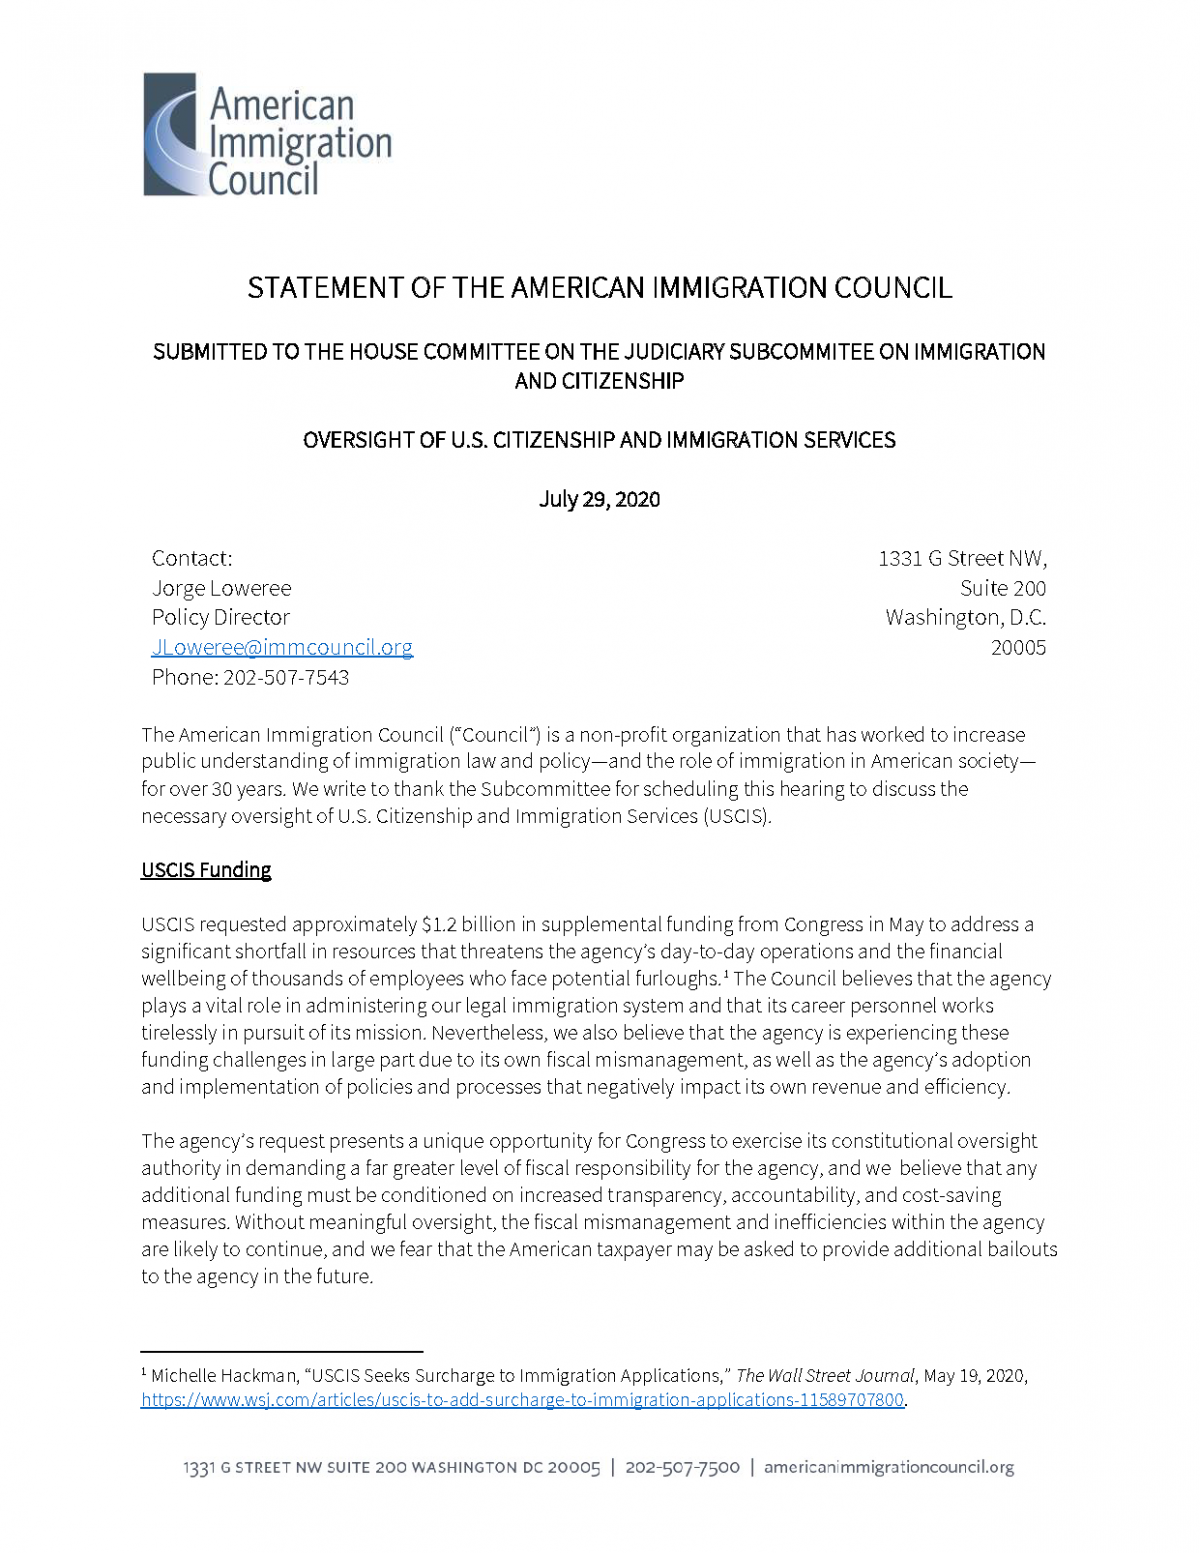 Immigration Letter Of Recommendation For Family Sample from www.americanimmigrationcouncil.org